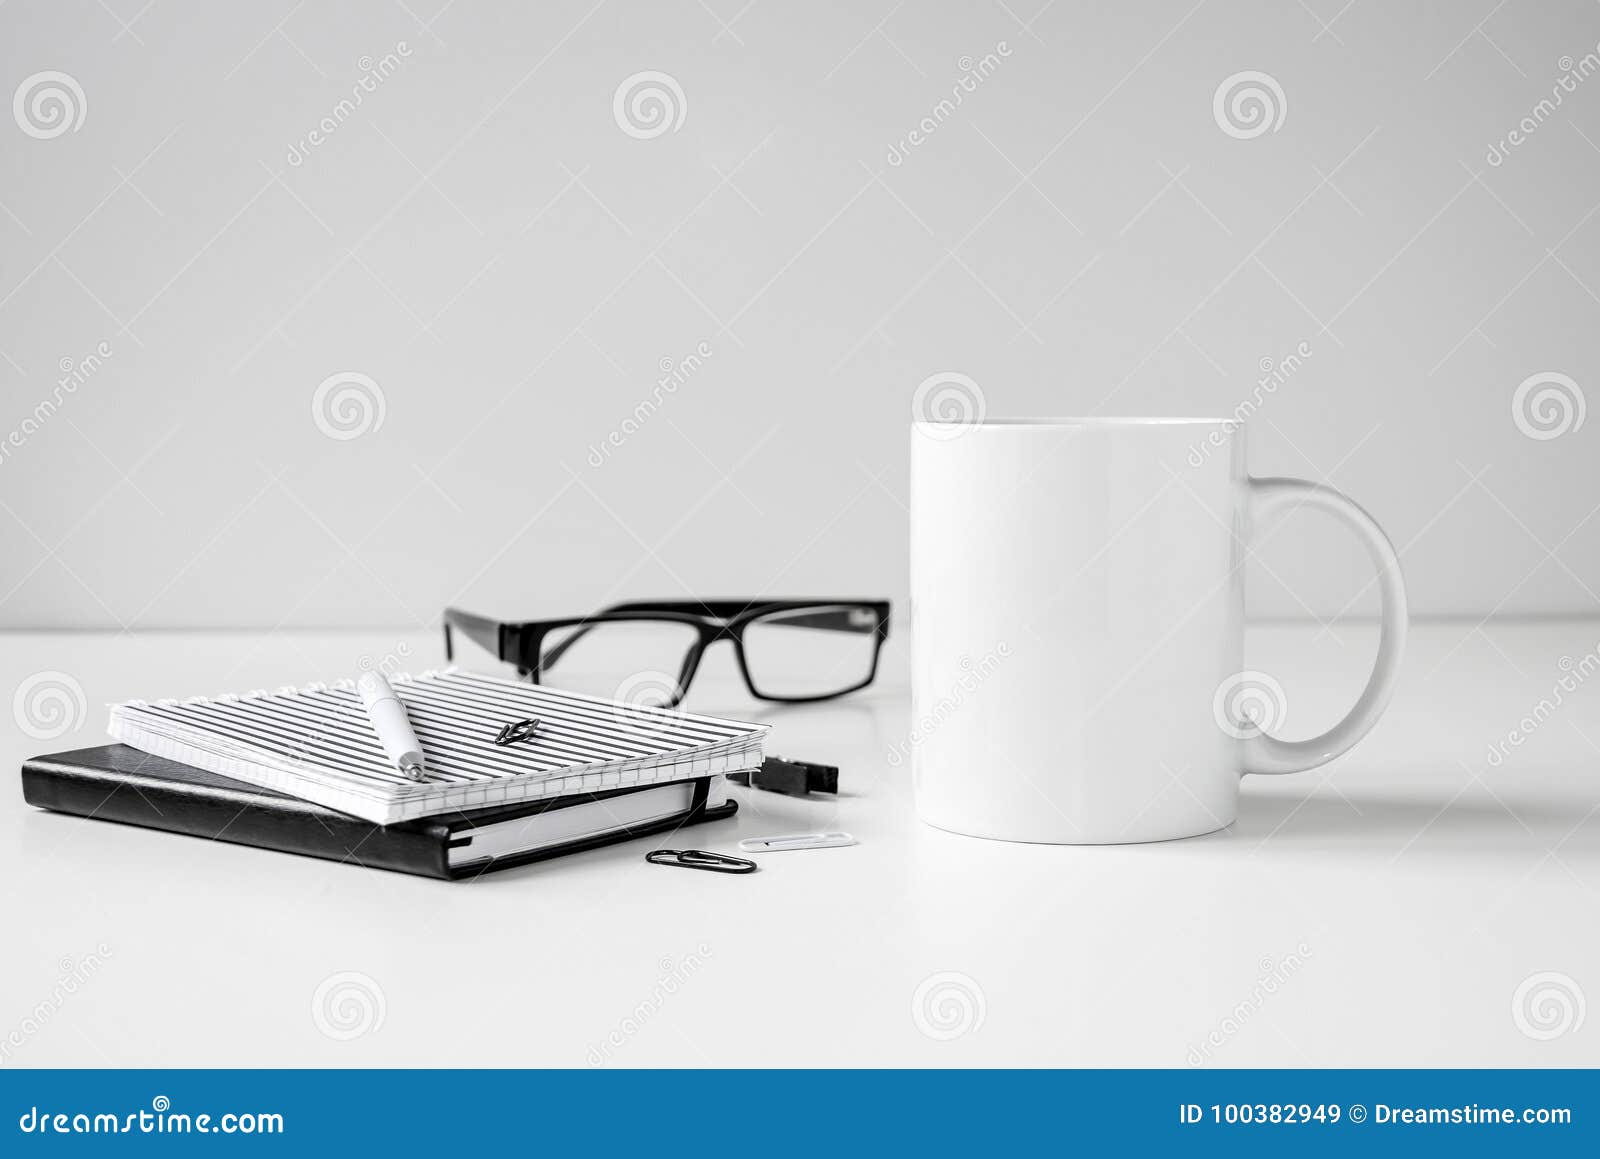 black and white coffee mug mock up with notebooks, pen and eyeglasses